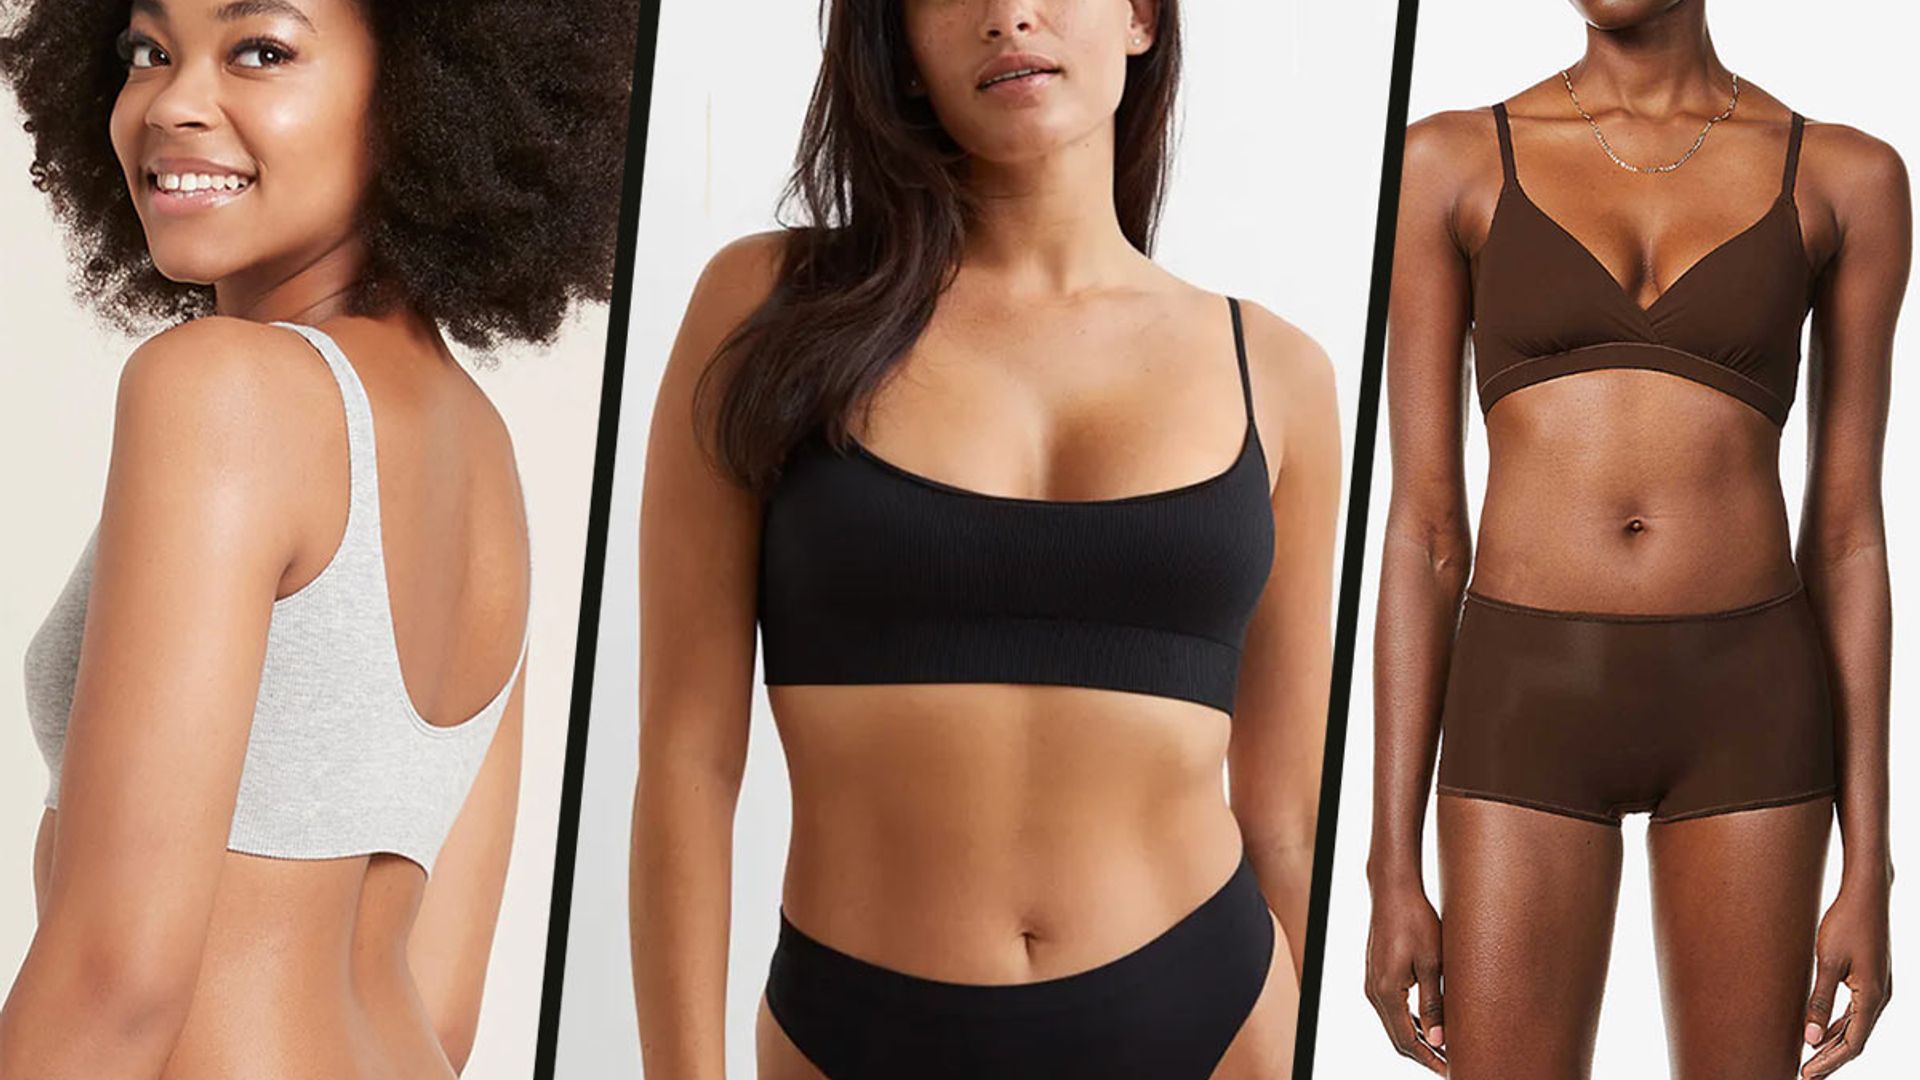 Discover our lingerie collection and learn more about M&S Bra Fit